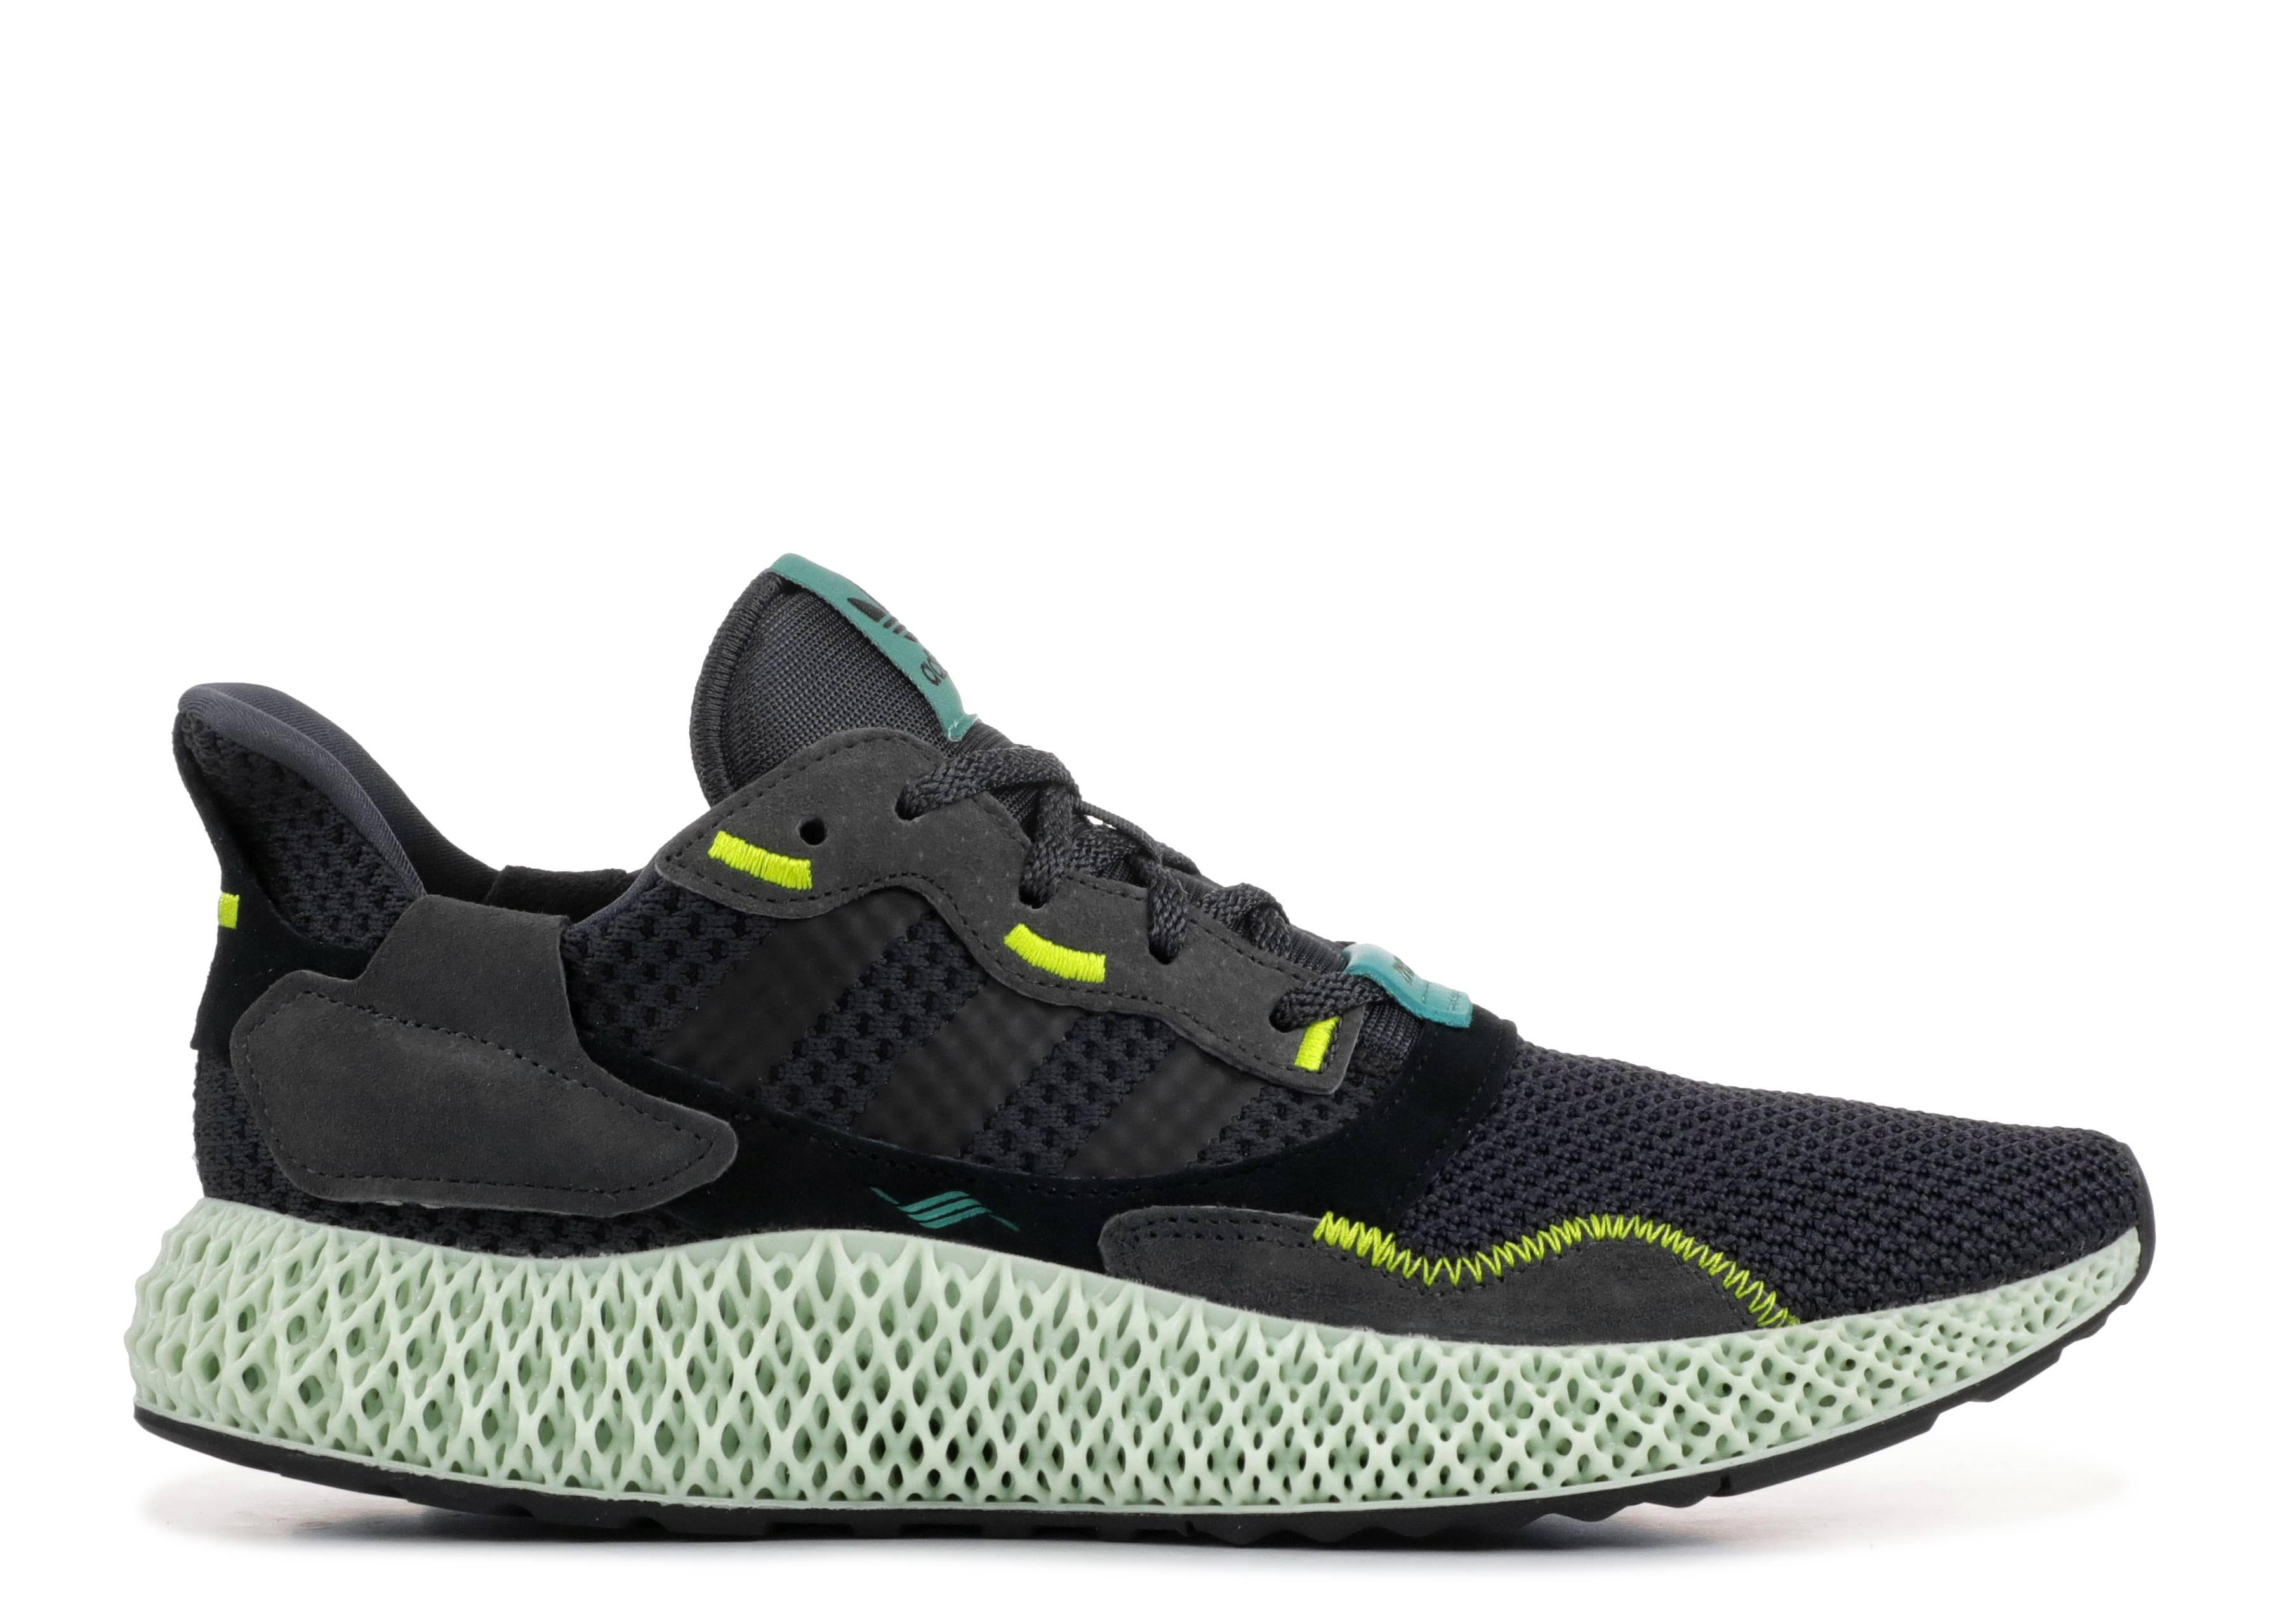 adidas Zx 4000 4d Shoes - Size 4 in Carbon (Green) for Men - Save 71% ...